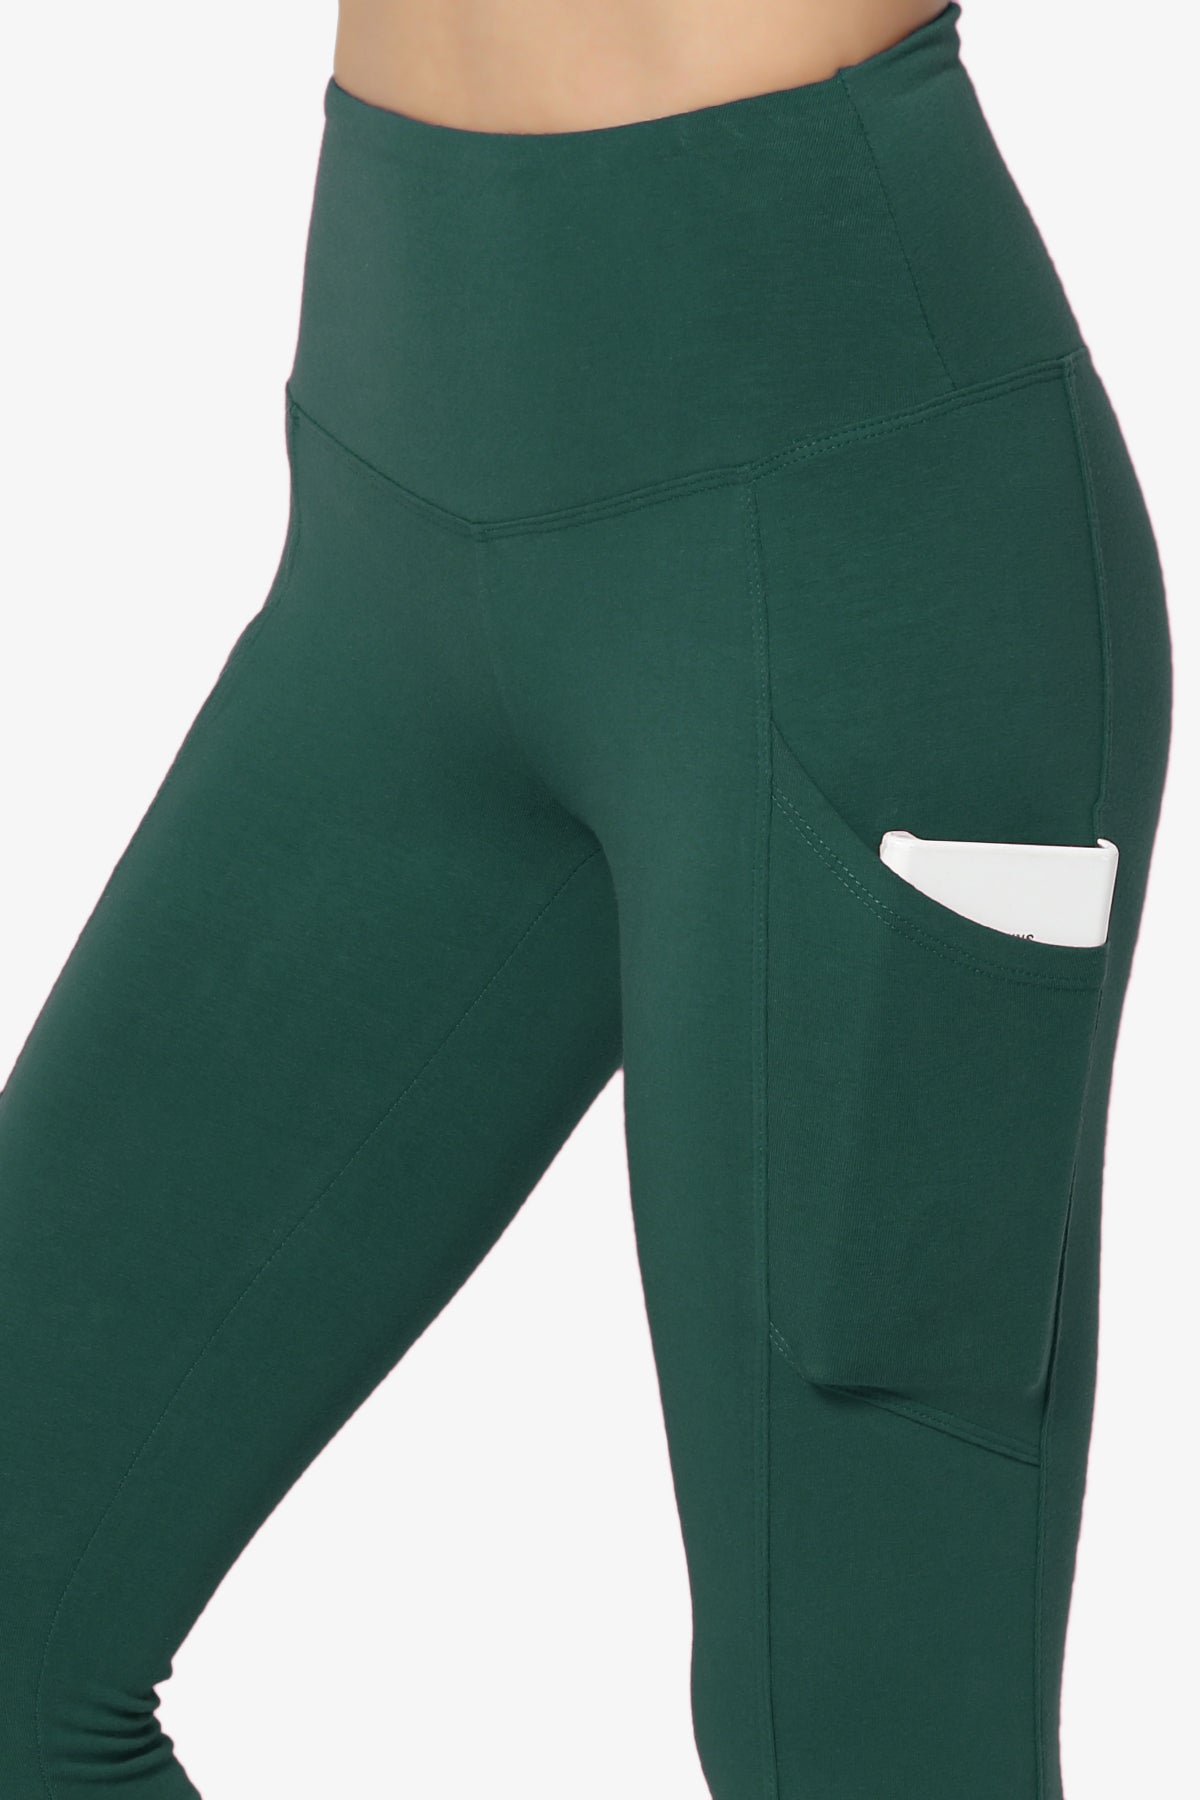 Ansley Luxe Cotton Leggings with Pockets HUNTER GREEN_5